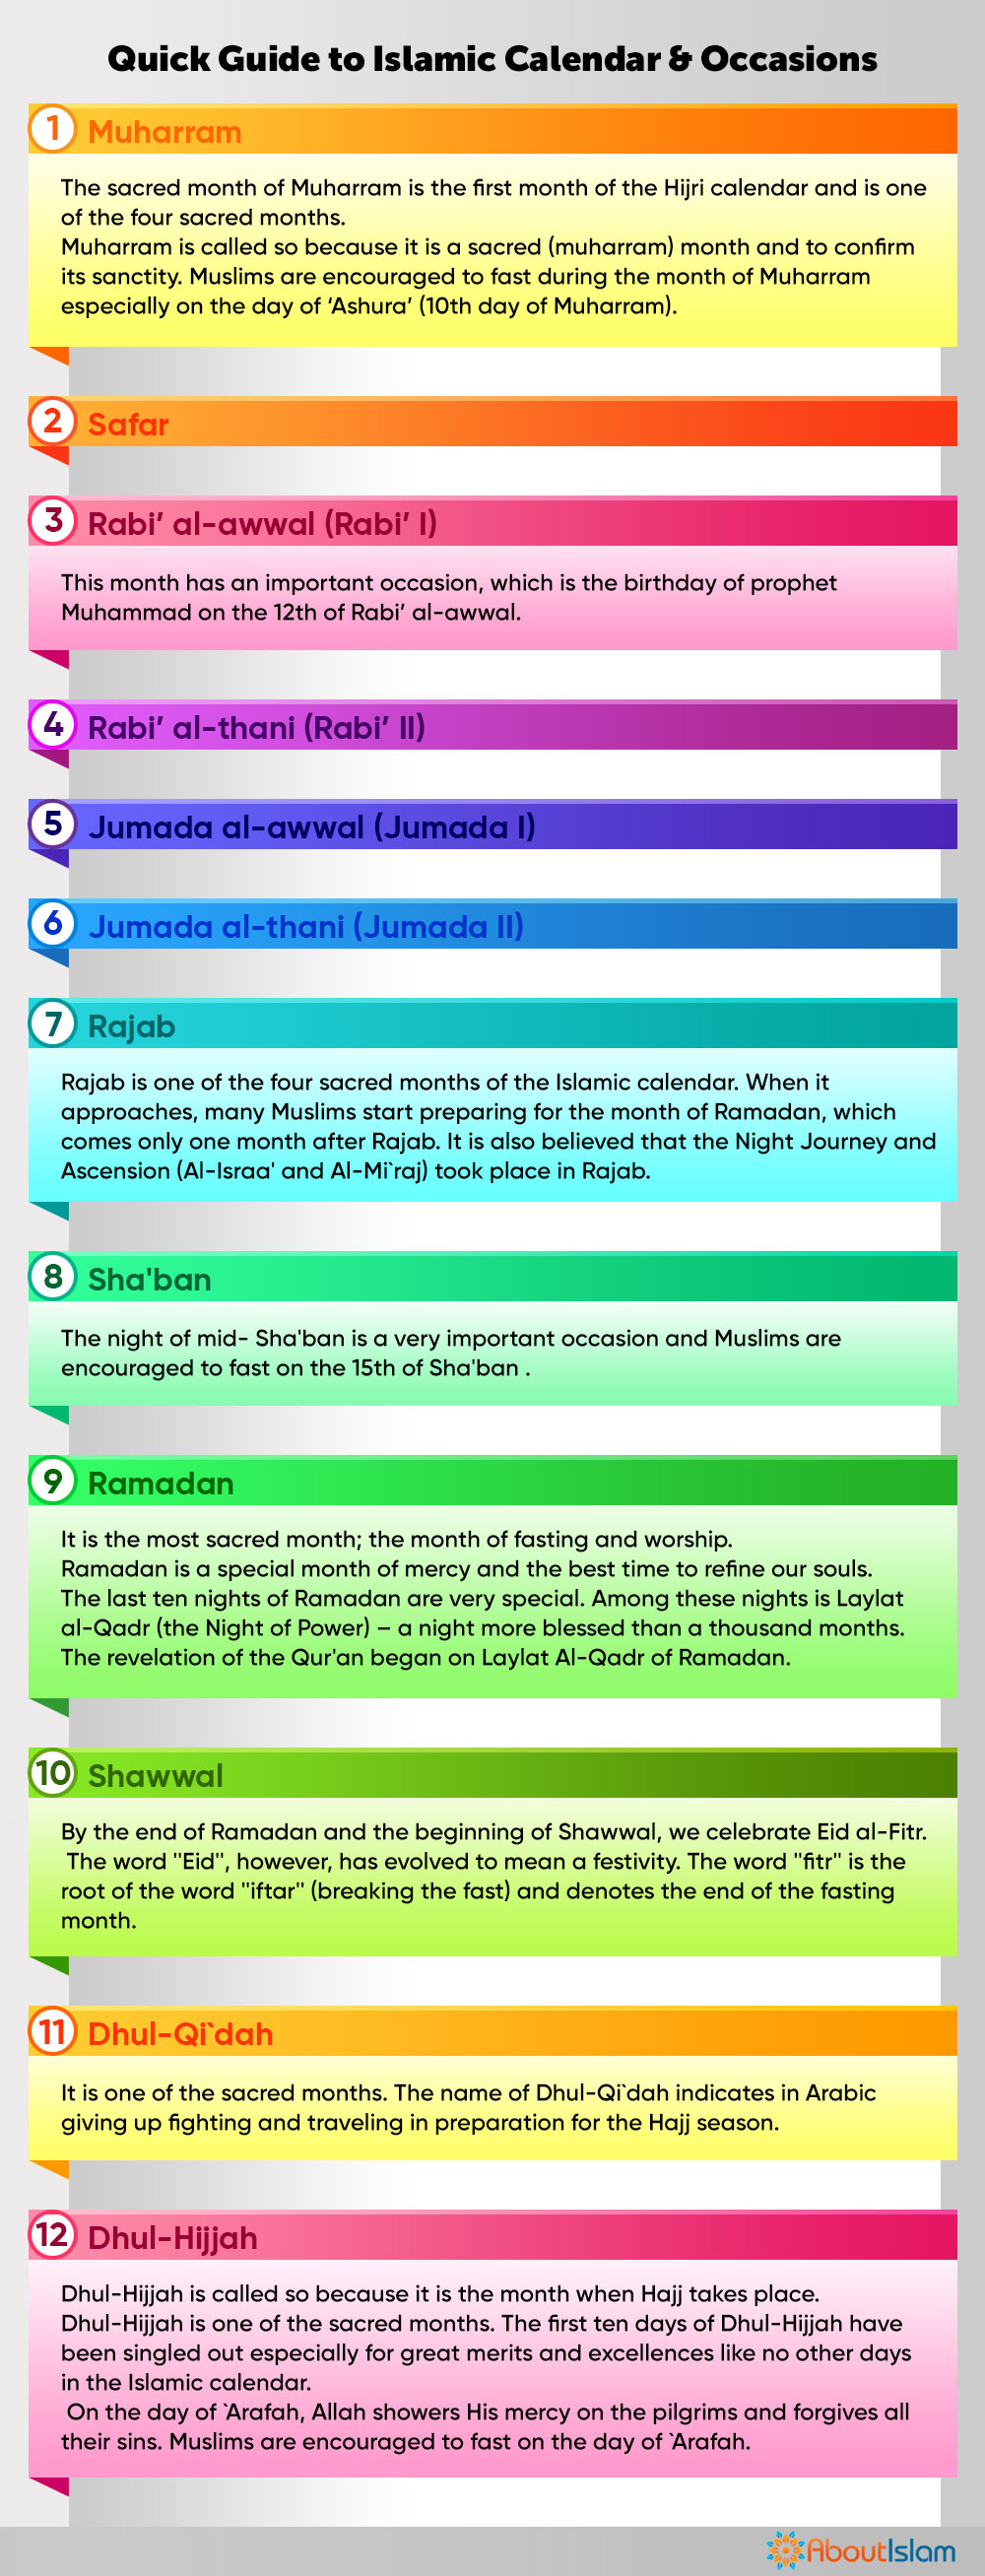 Islamic Calendar & Religious Occasions (Quick Guide) - About Islam